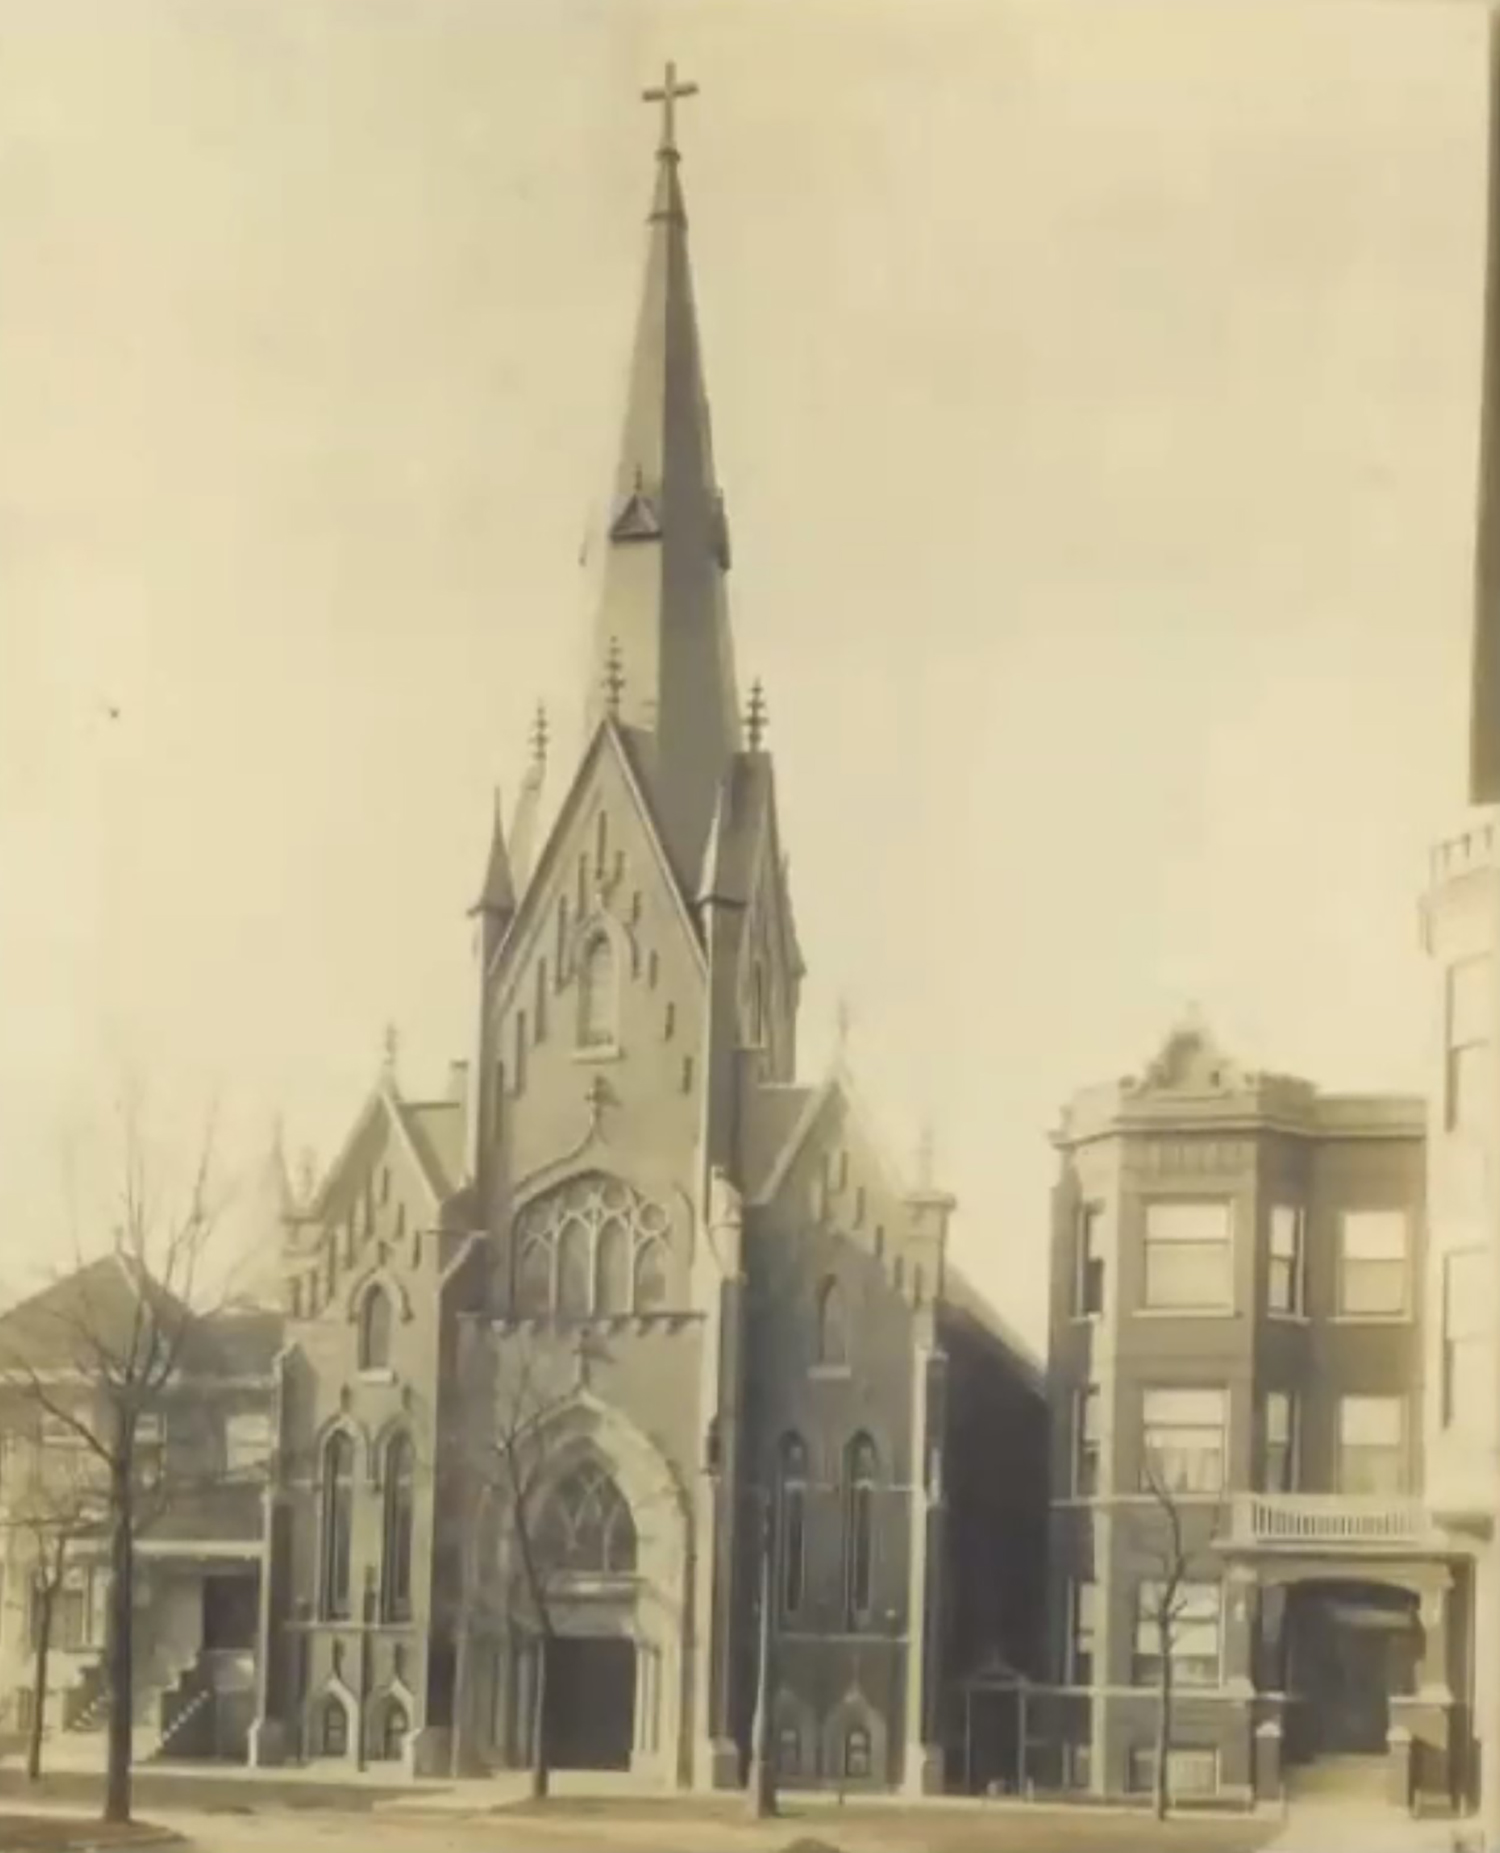 Historic Image of Norwegian Lutheran Memorial Church of Chicago. Image by the Church